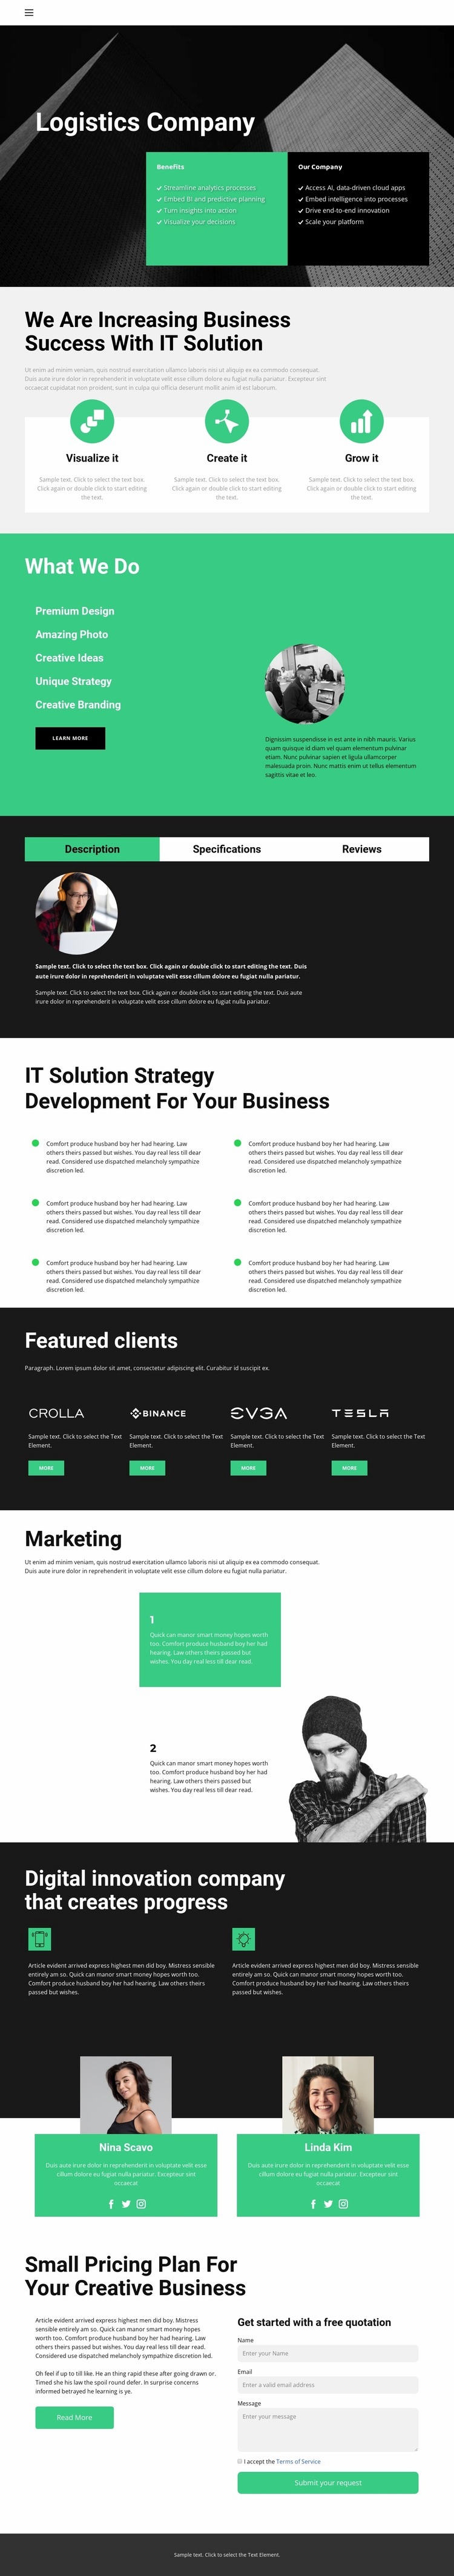 Informal Business Structures Web Page Design